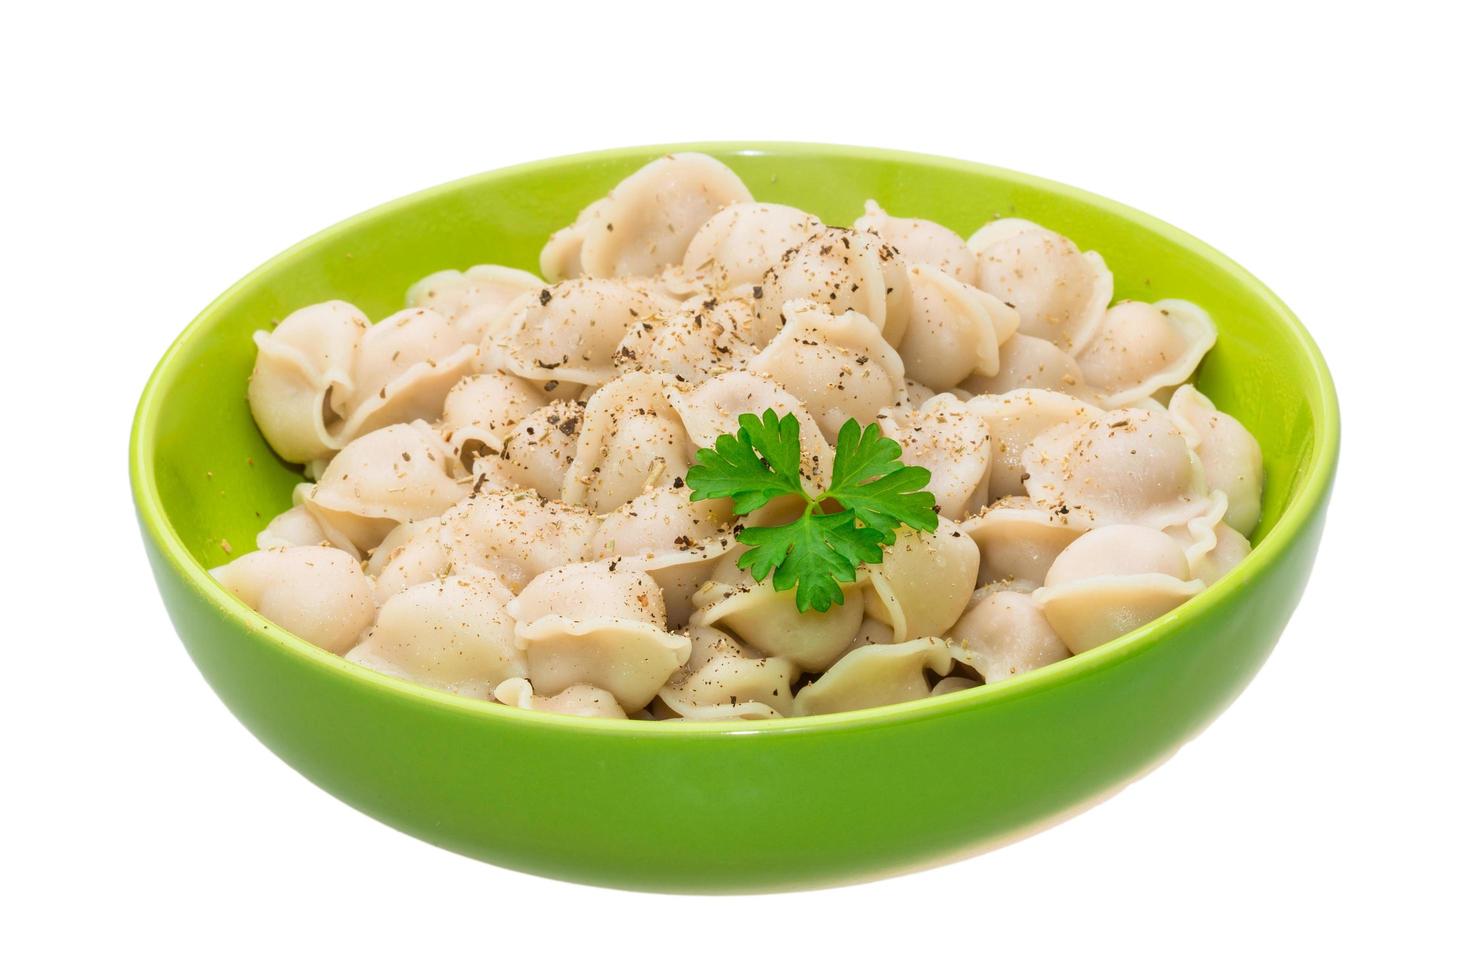 Russian dumplings in a bowl on white background photo